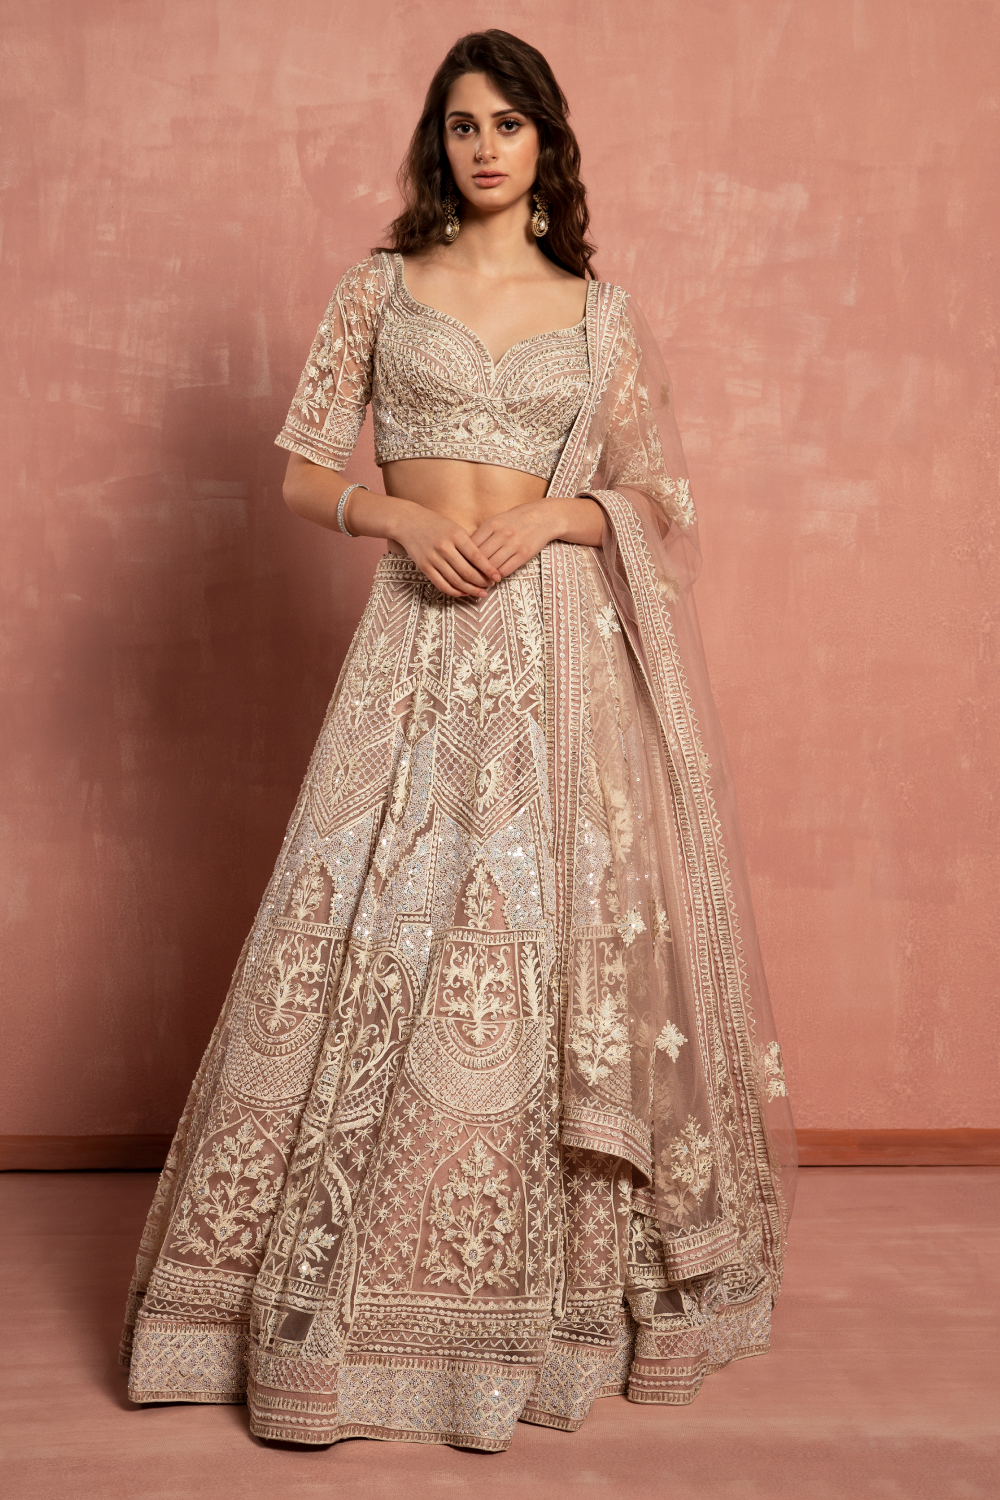 DUSTY PINK CLASSIC LEHENGA SET WITH PATTERNED IVORY EMBROIDERY